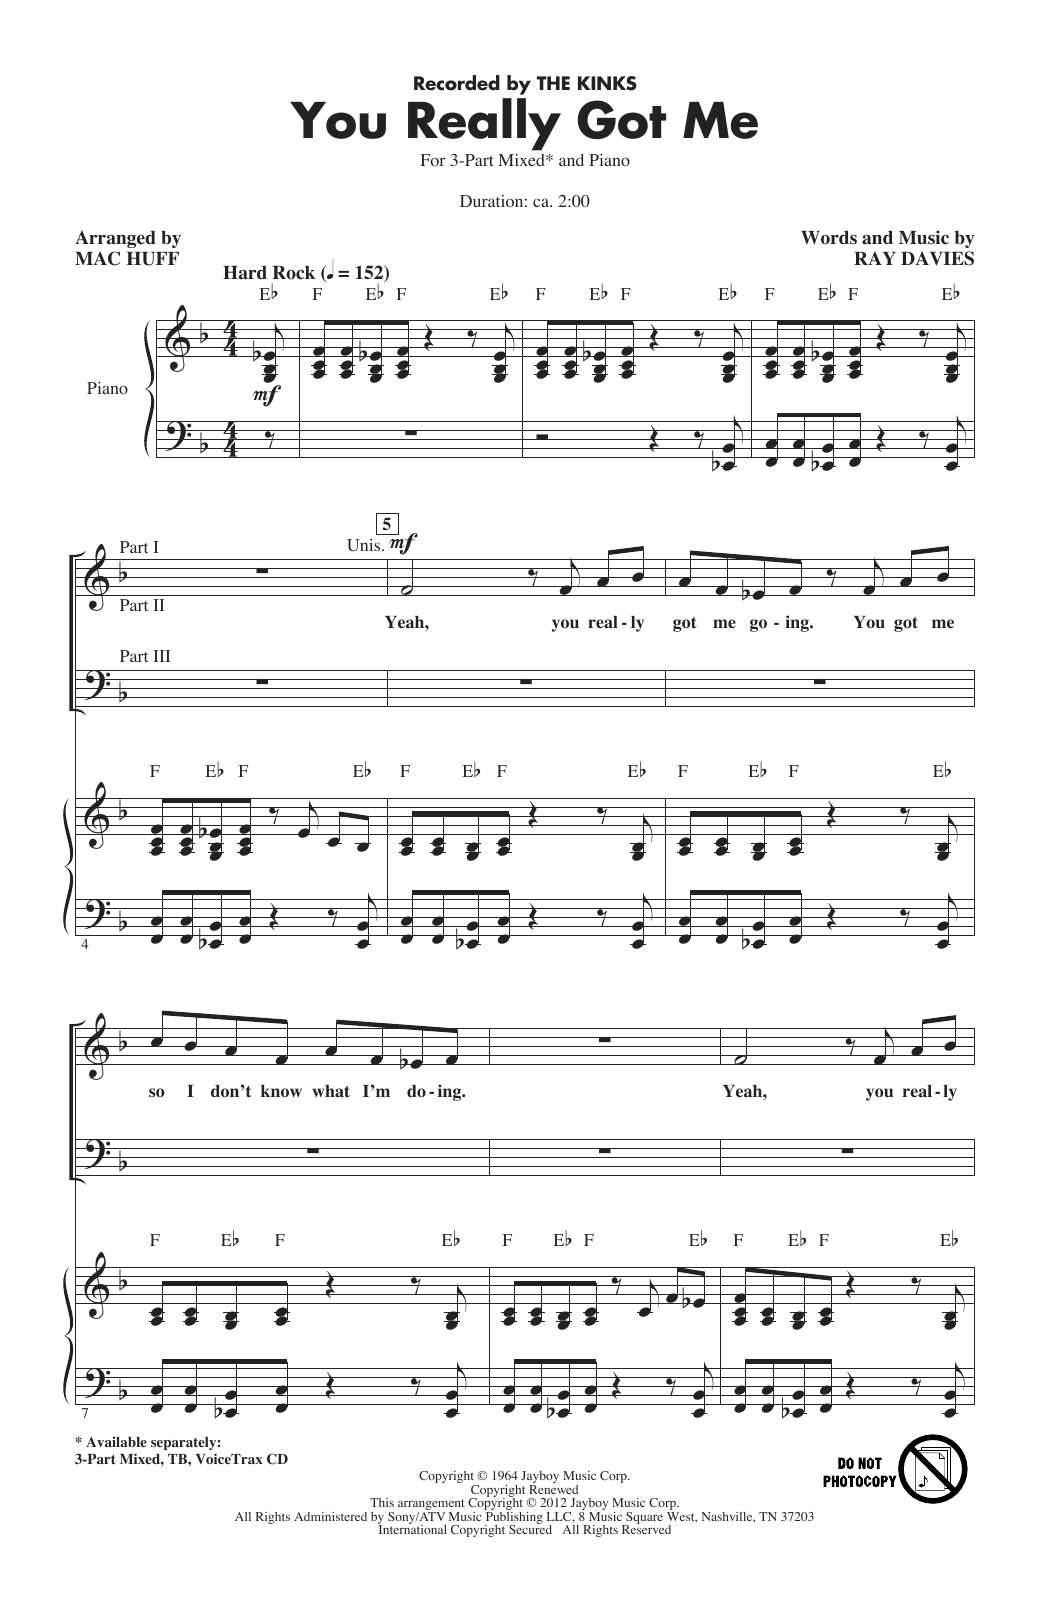 Download The Kinks You Really Got Me (arr. Mac Huff) Sheet Music